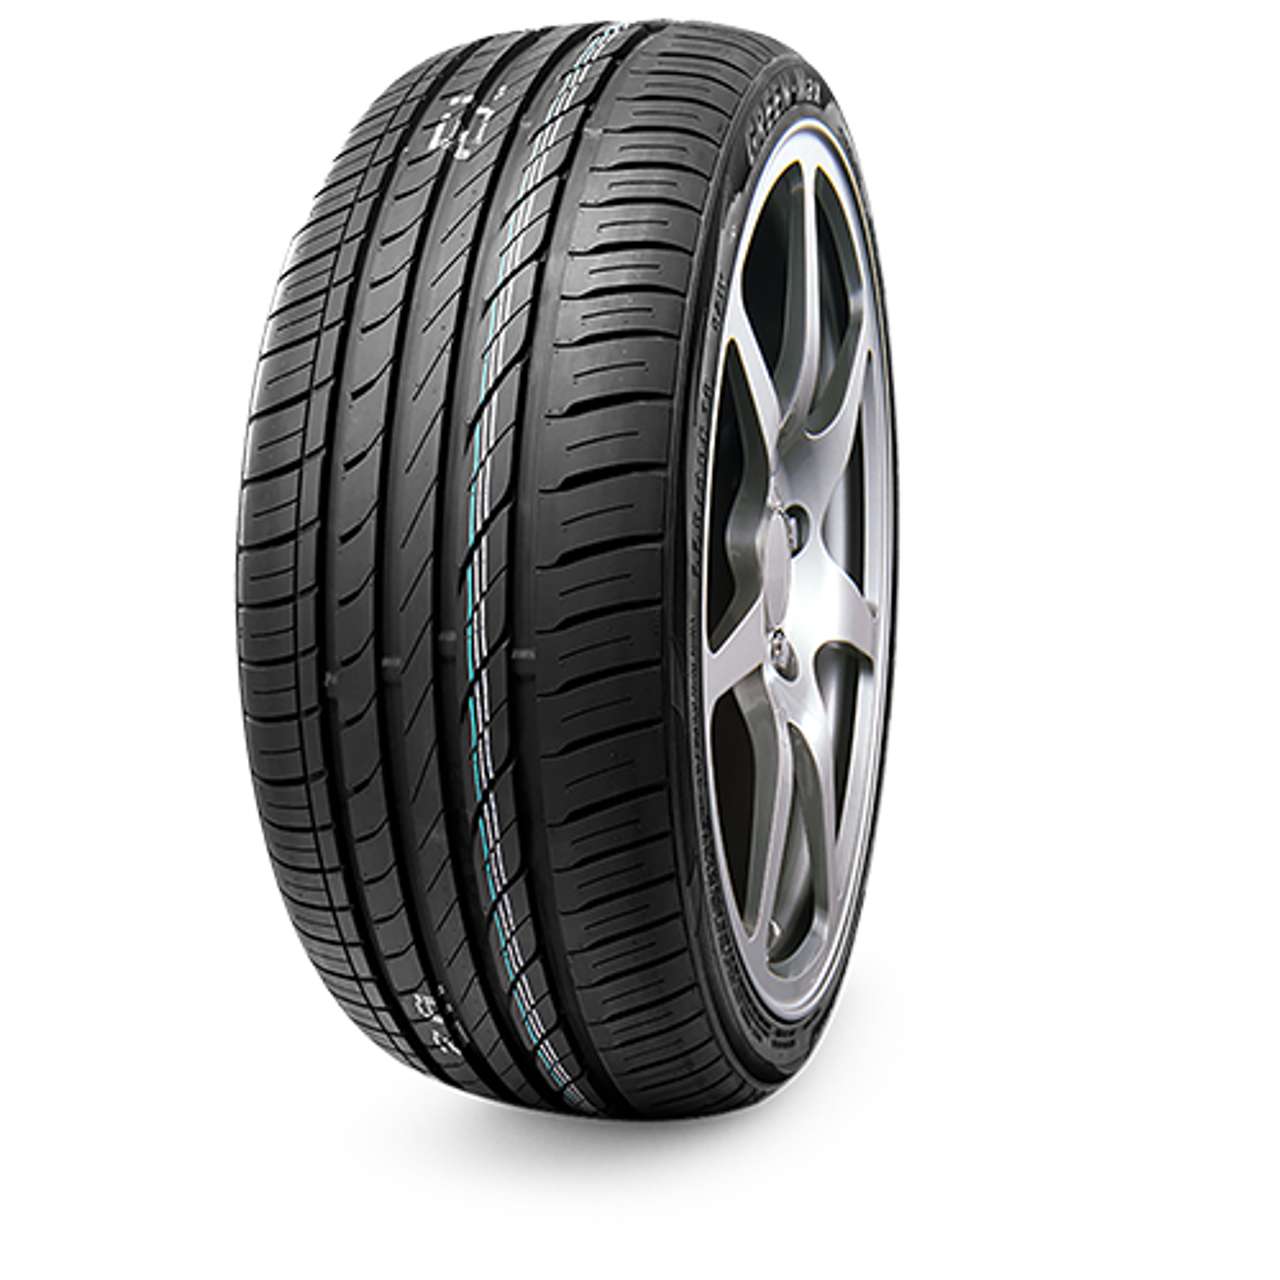 LINGLONG GREEN-MAX 265/35R18 97Y MFS BSW